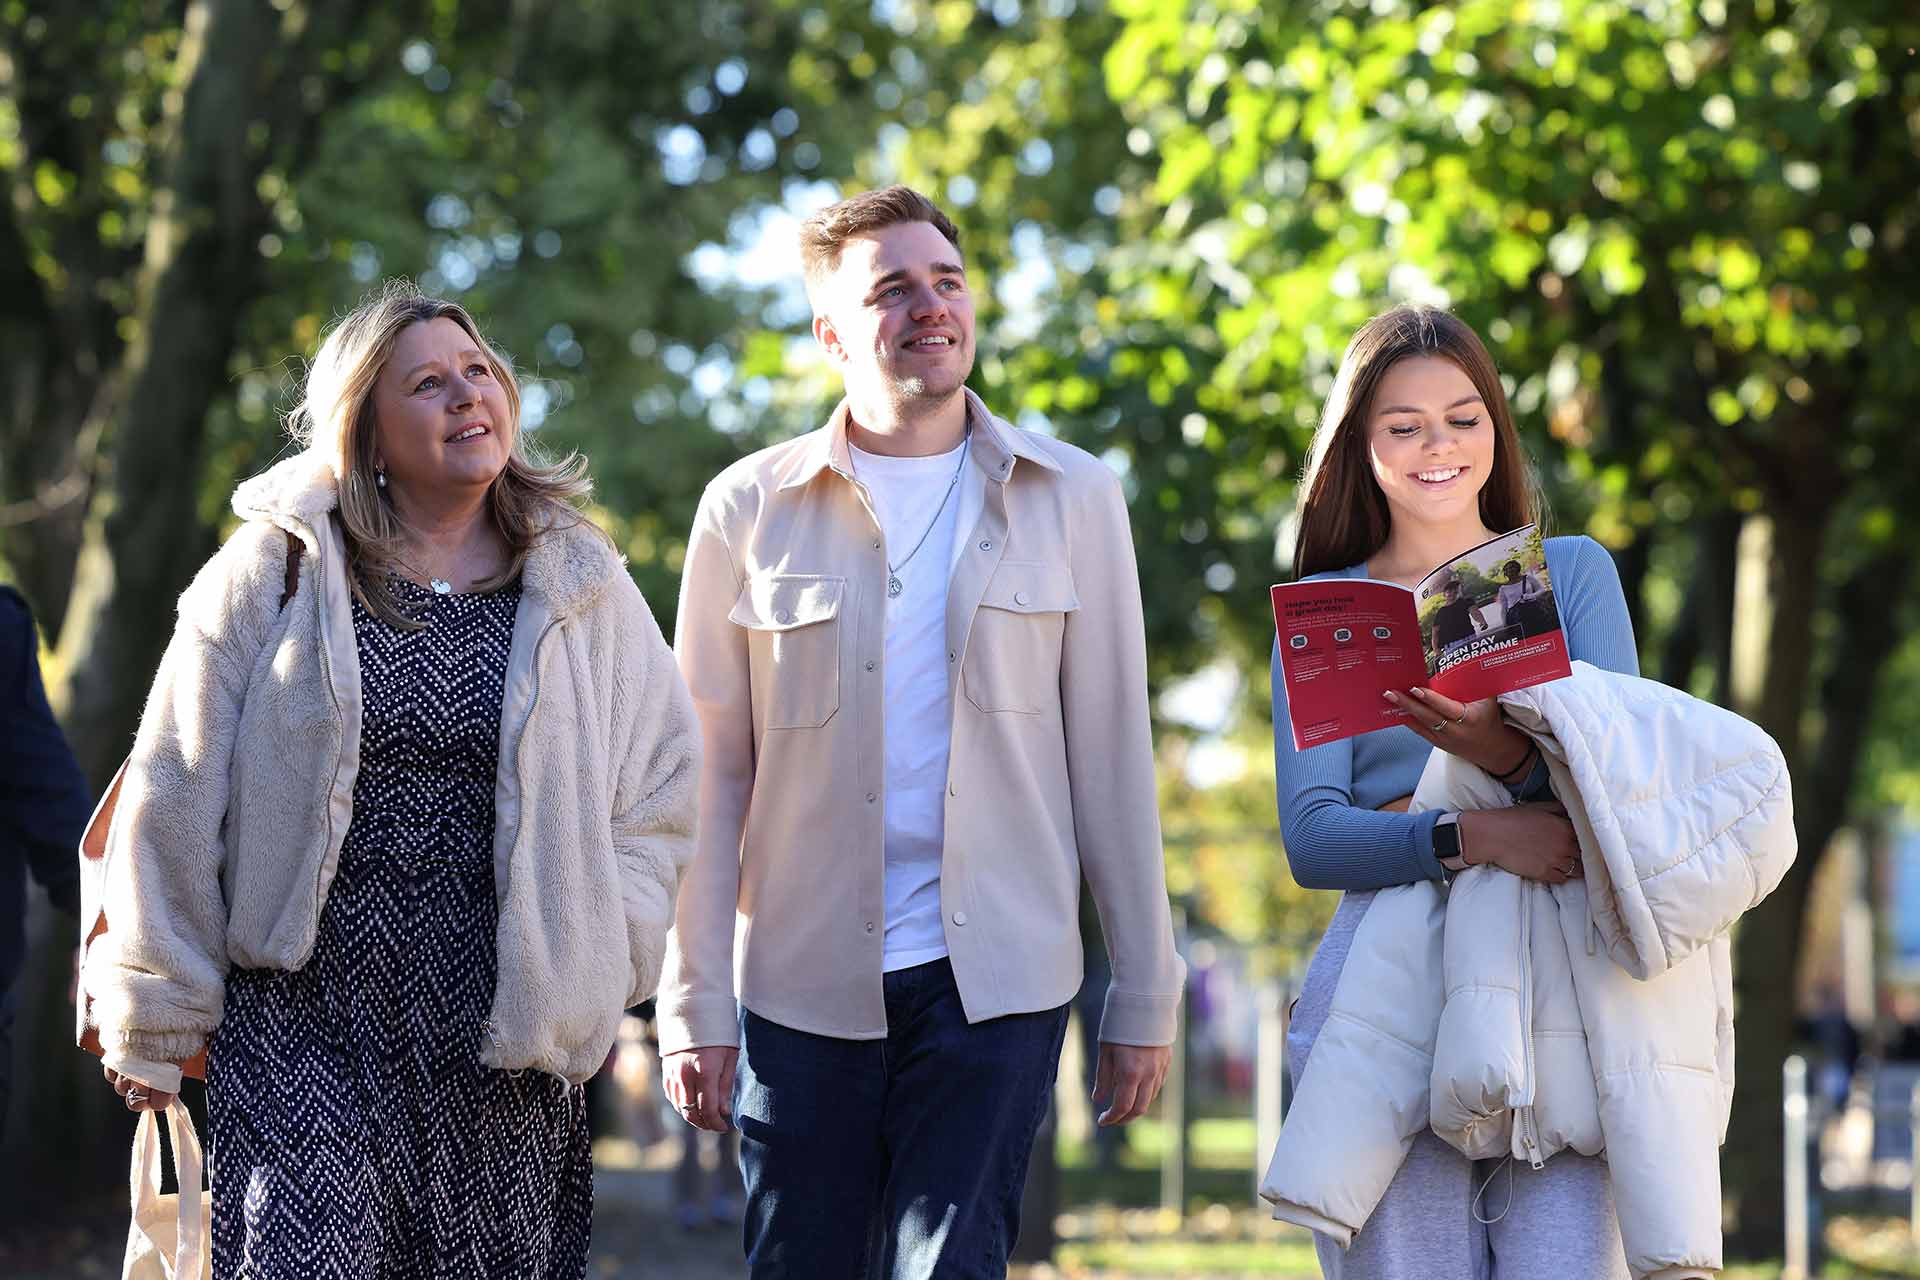 A parent and two prospective students, one male and one female, walk across campus. They are surrounded by trees with green leaves and the sun is shining. The female prospective student is reading an Open Day booklet with a pink cover.